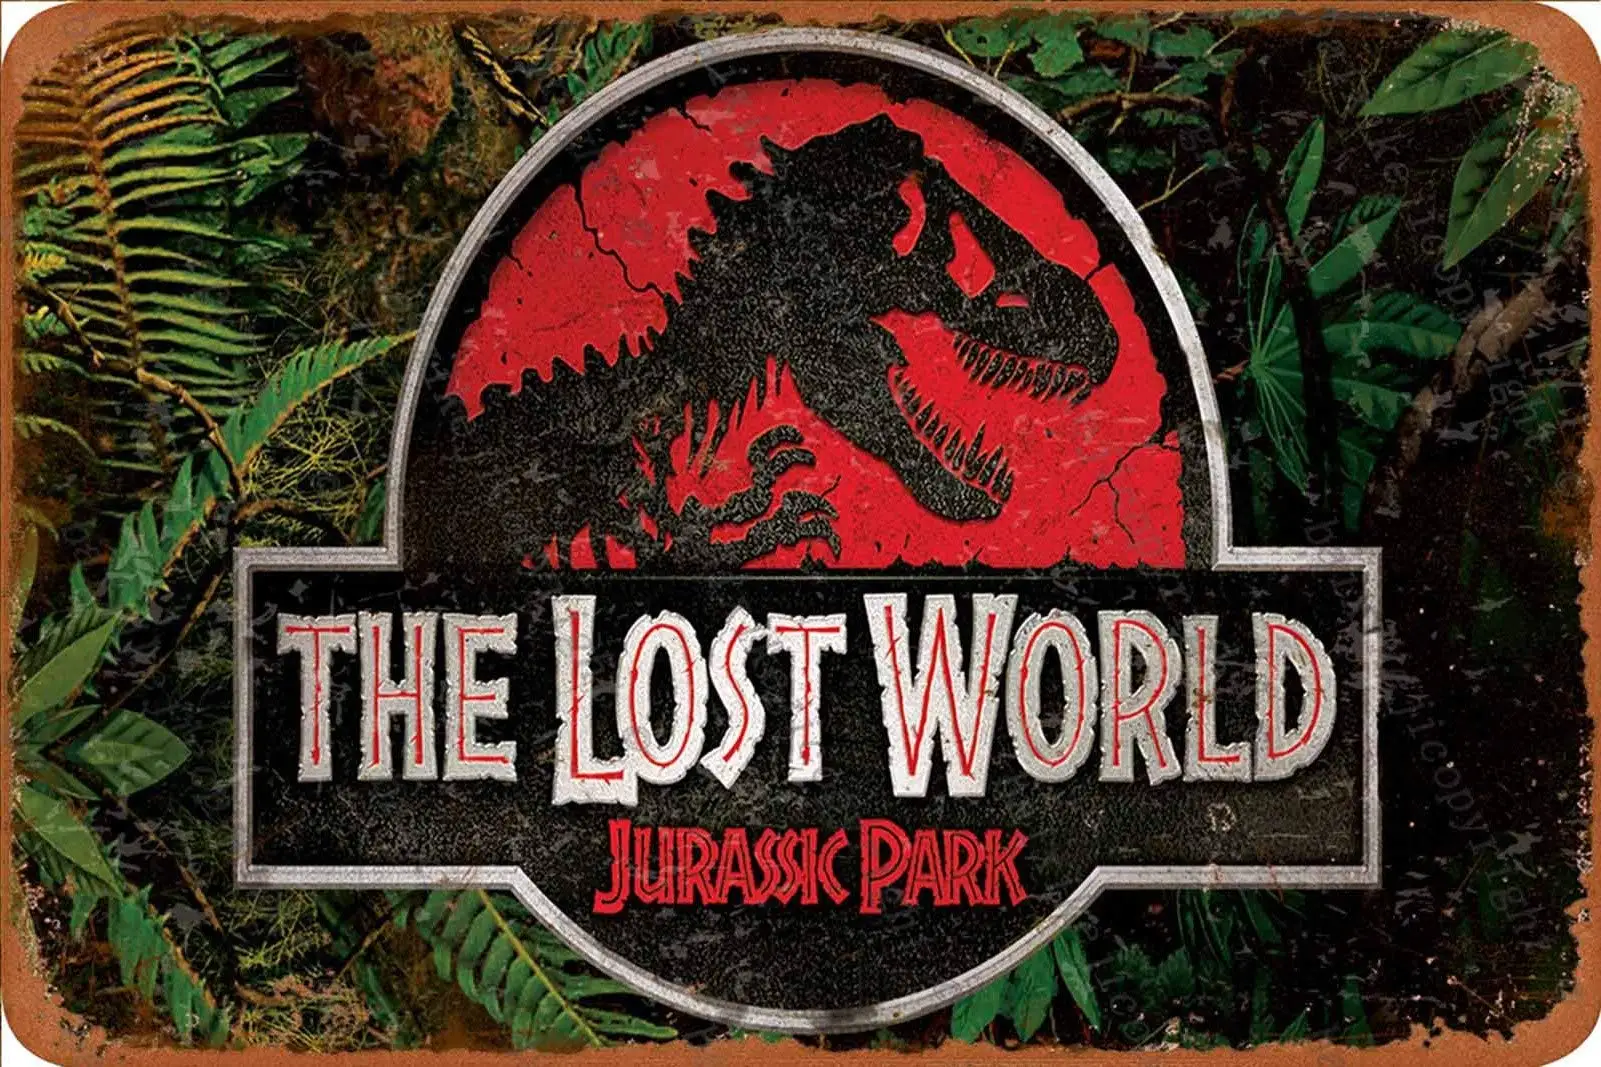 

Vintage Tin Signs Jurassic Park The Lost World Metal Sign Poster Retro Art Plaque Wall Decor for Bar Cafe Garden Bedroom